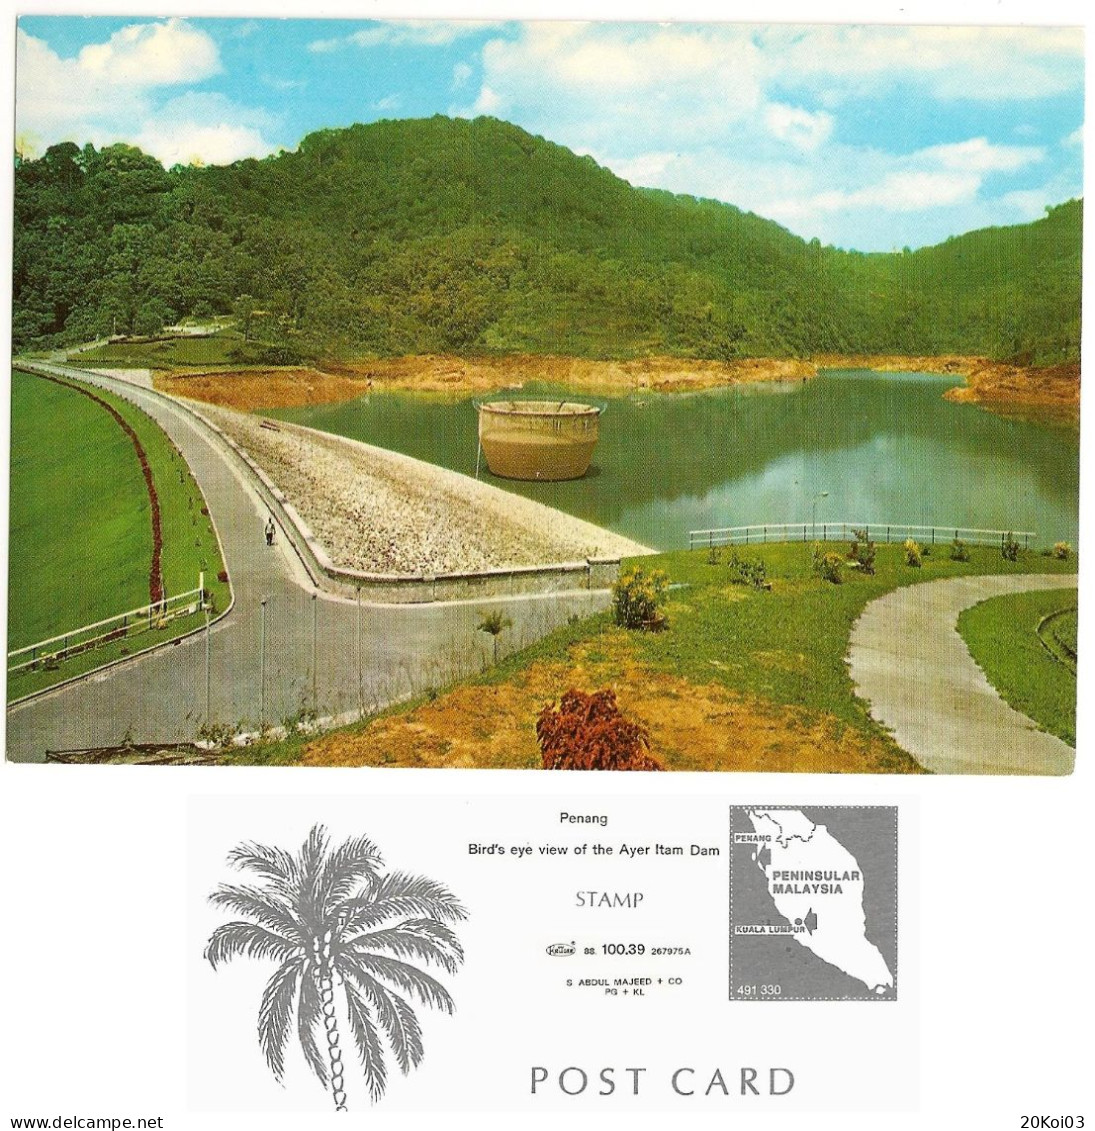 Malaysia Penang Ayer Itam Dam, Bird's Eye View,+/-1975's_UNC_KRUGER. 88_100.39_267975A _S. ABDUL MAJEED + CO_PG + KL_cpc - Malaysia